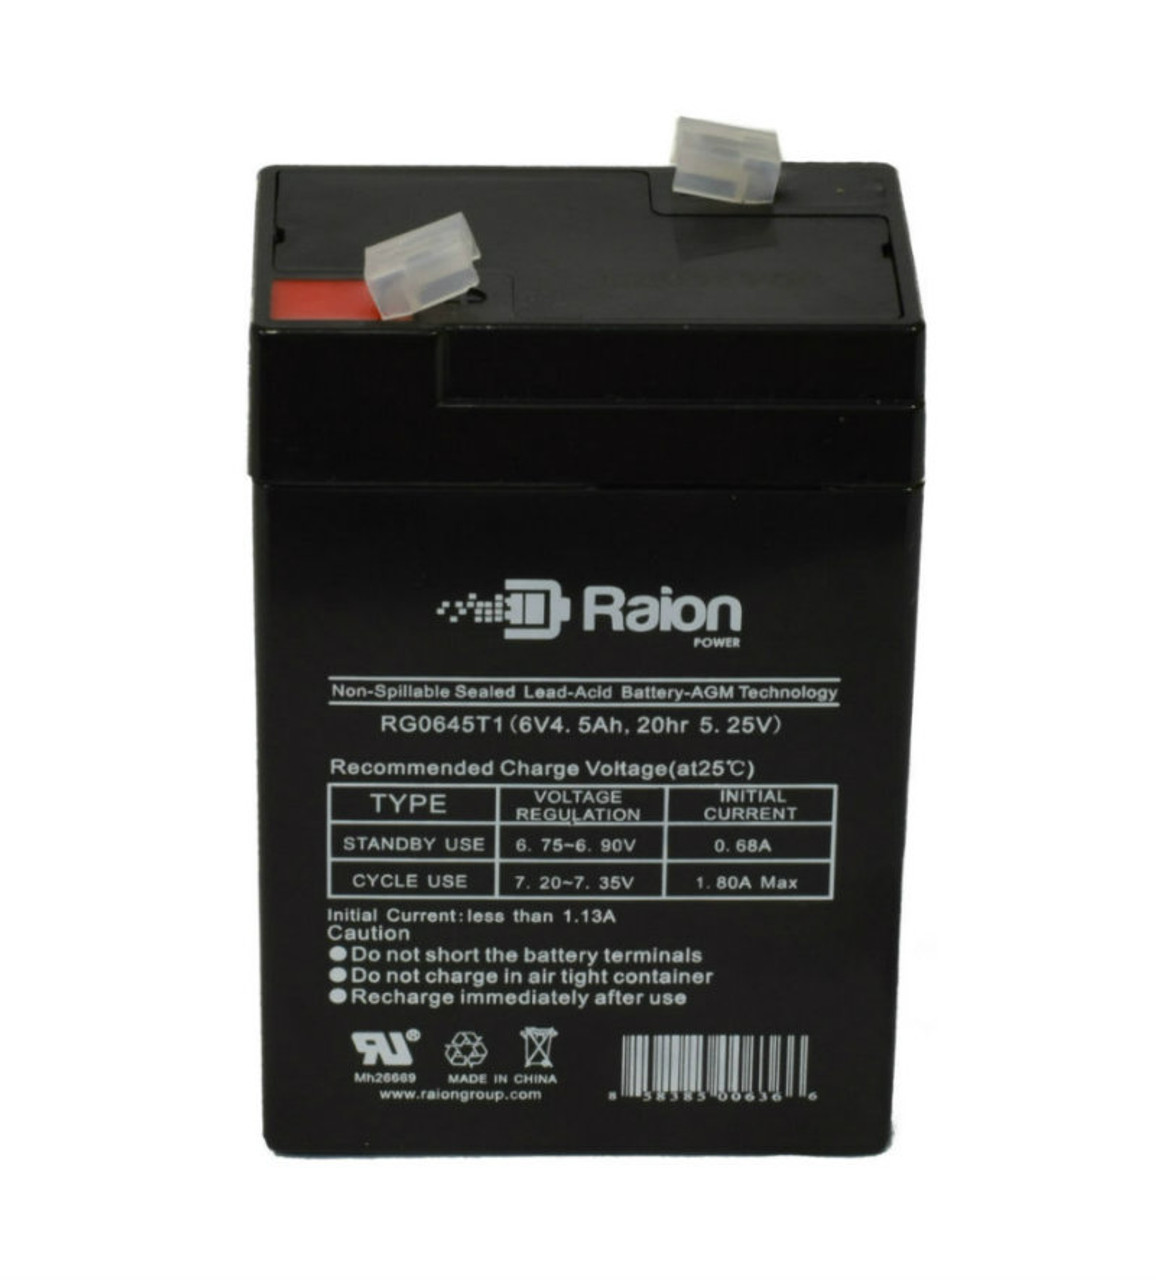 Raion Power RG0645T1 Replacement Battery Cartridge for Light CE1-5BL